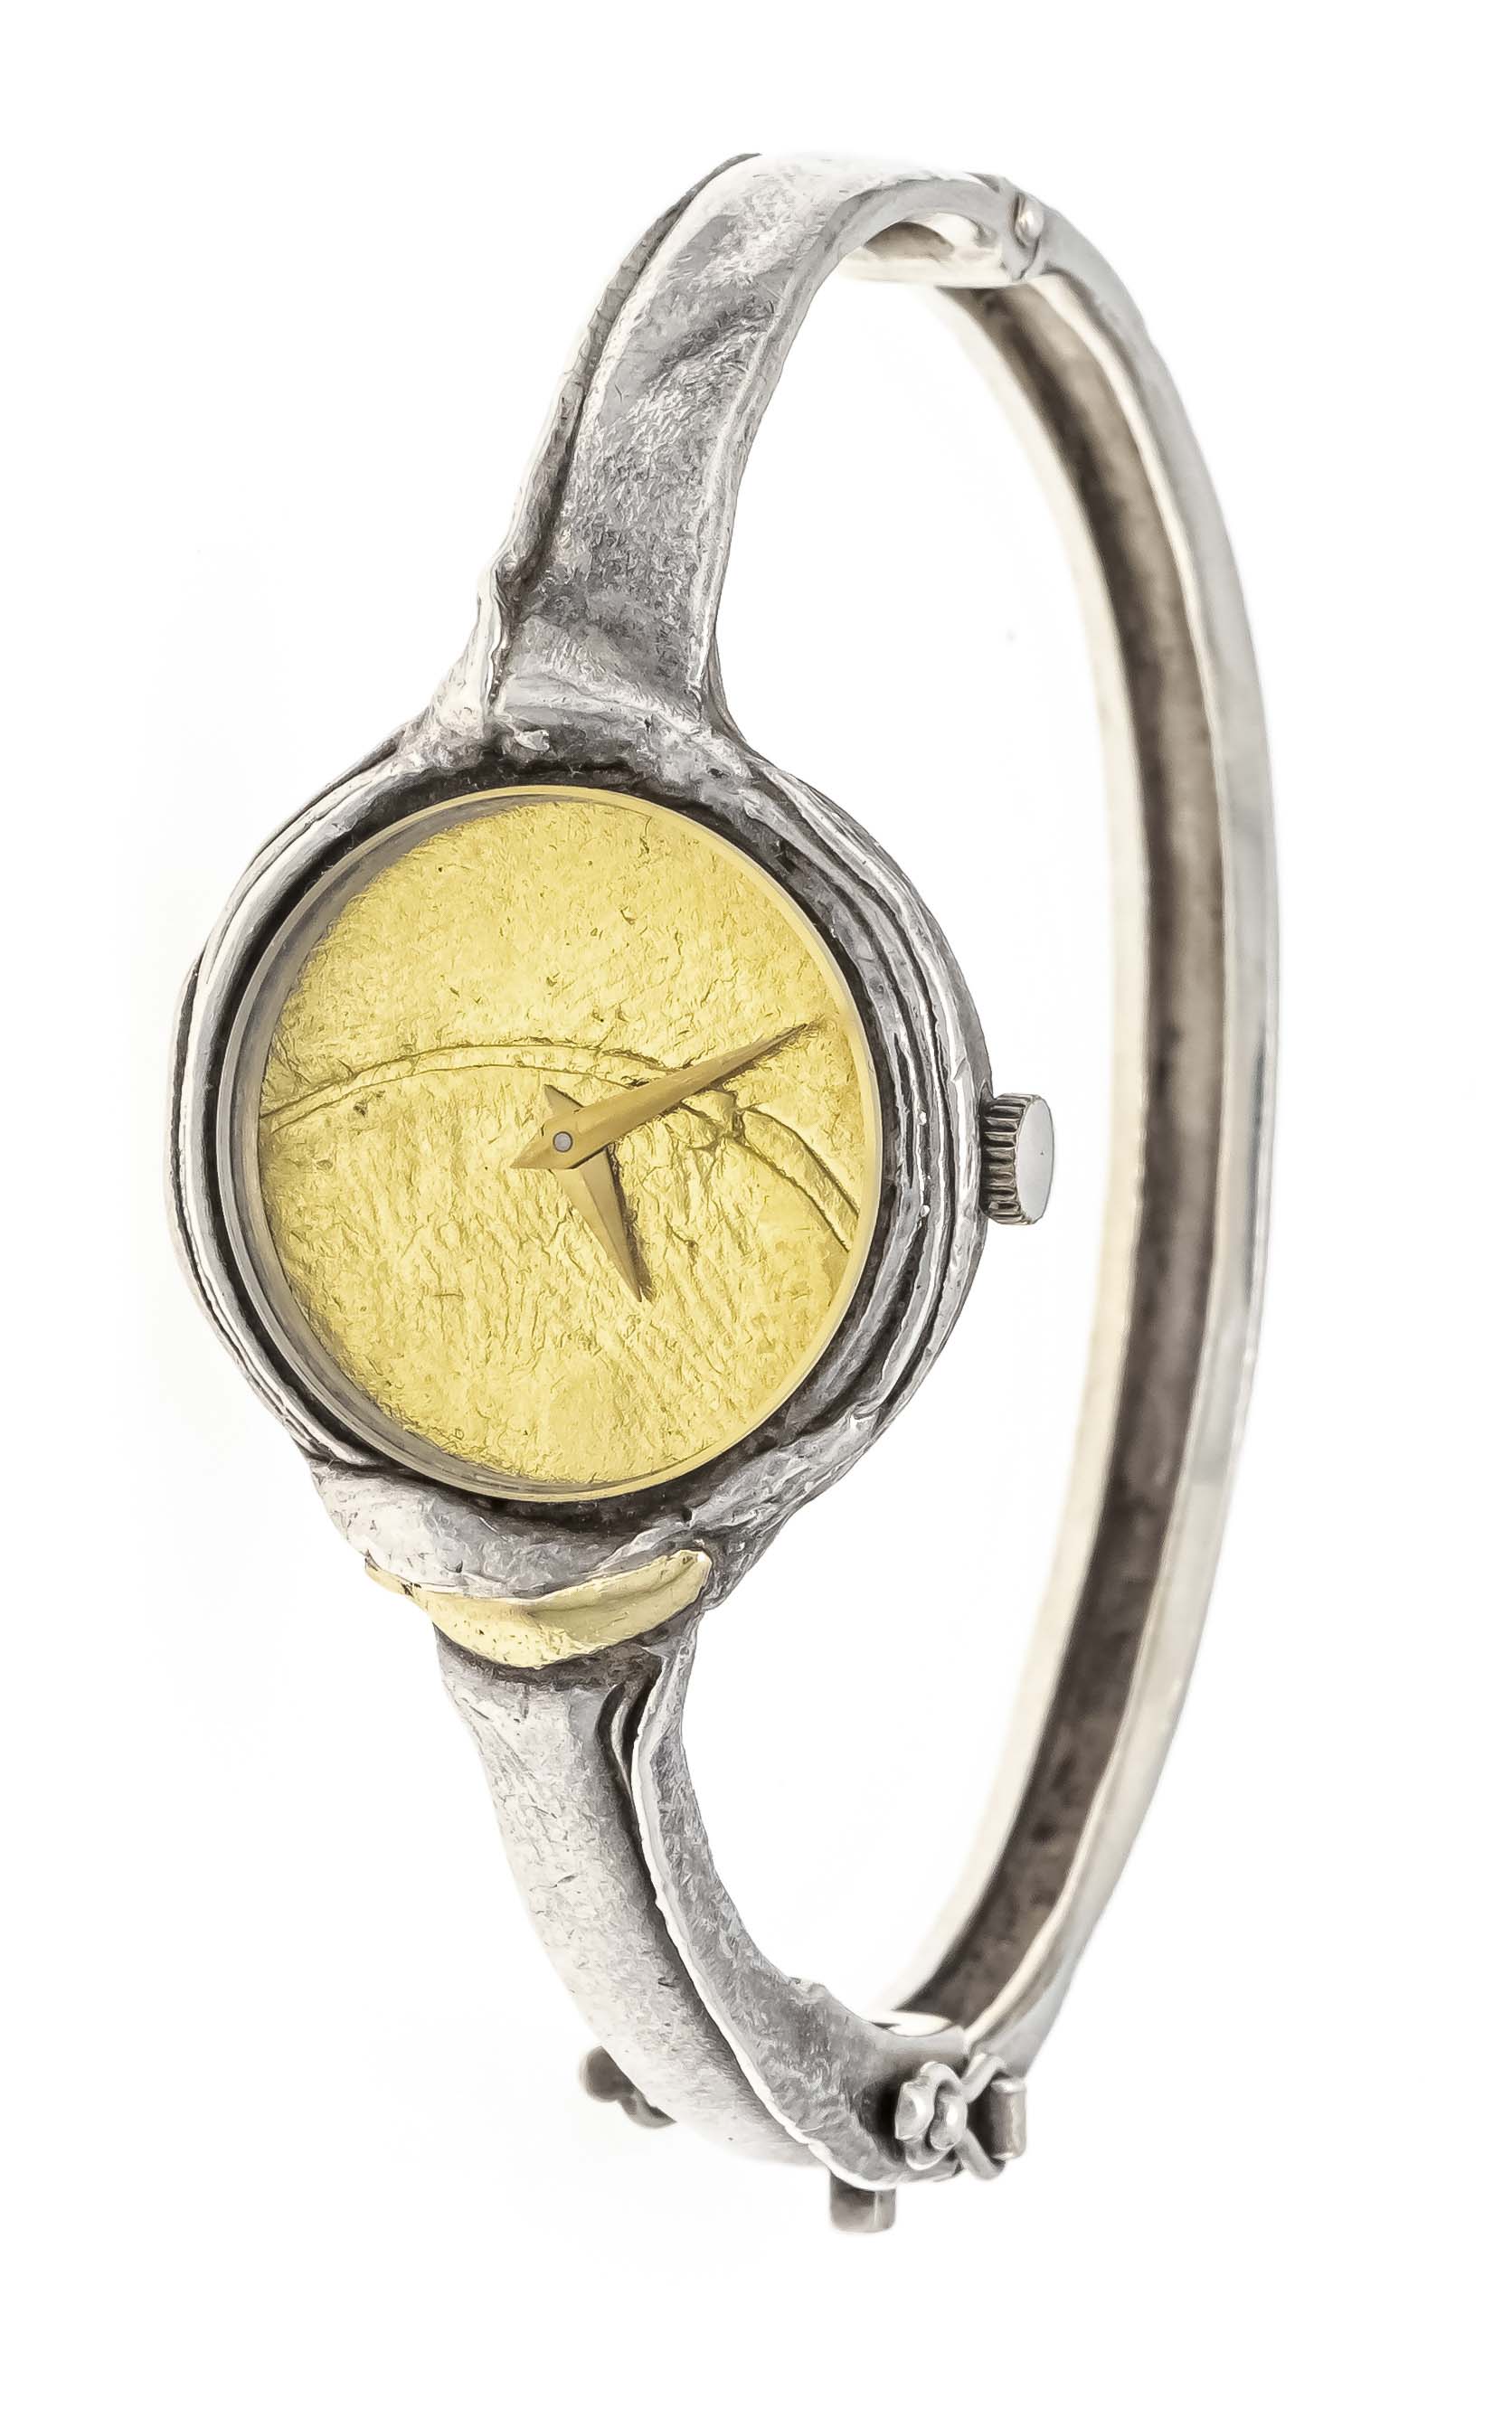 Ladies quartz watch, 925/000 silver sterling, case and bracelet partly gold plated in the style of